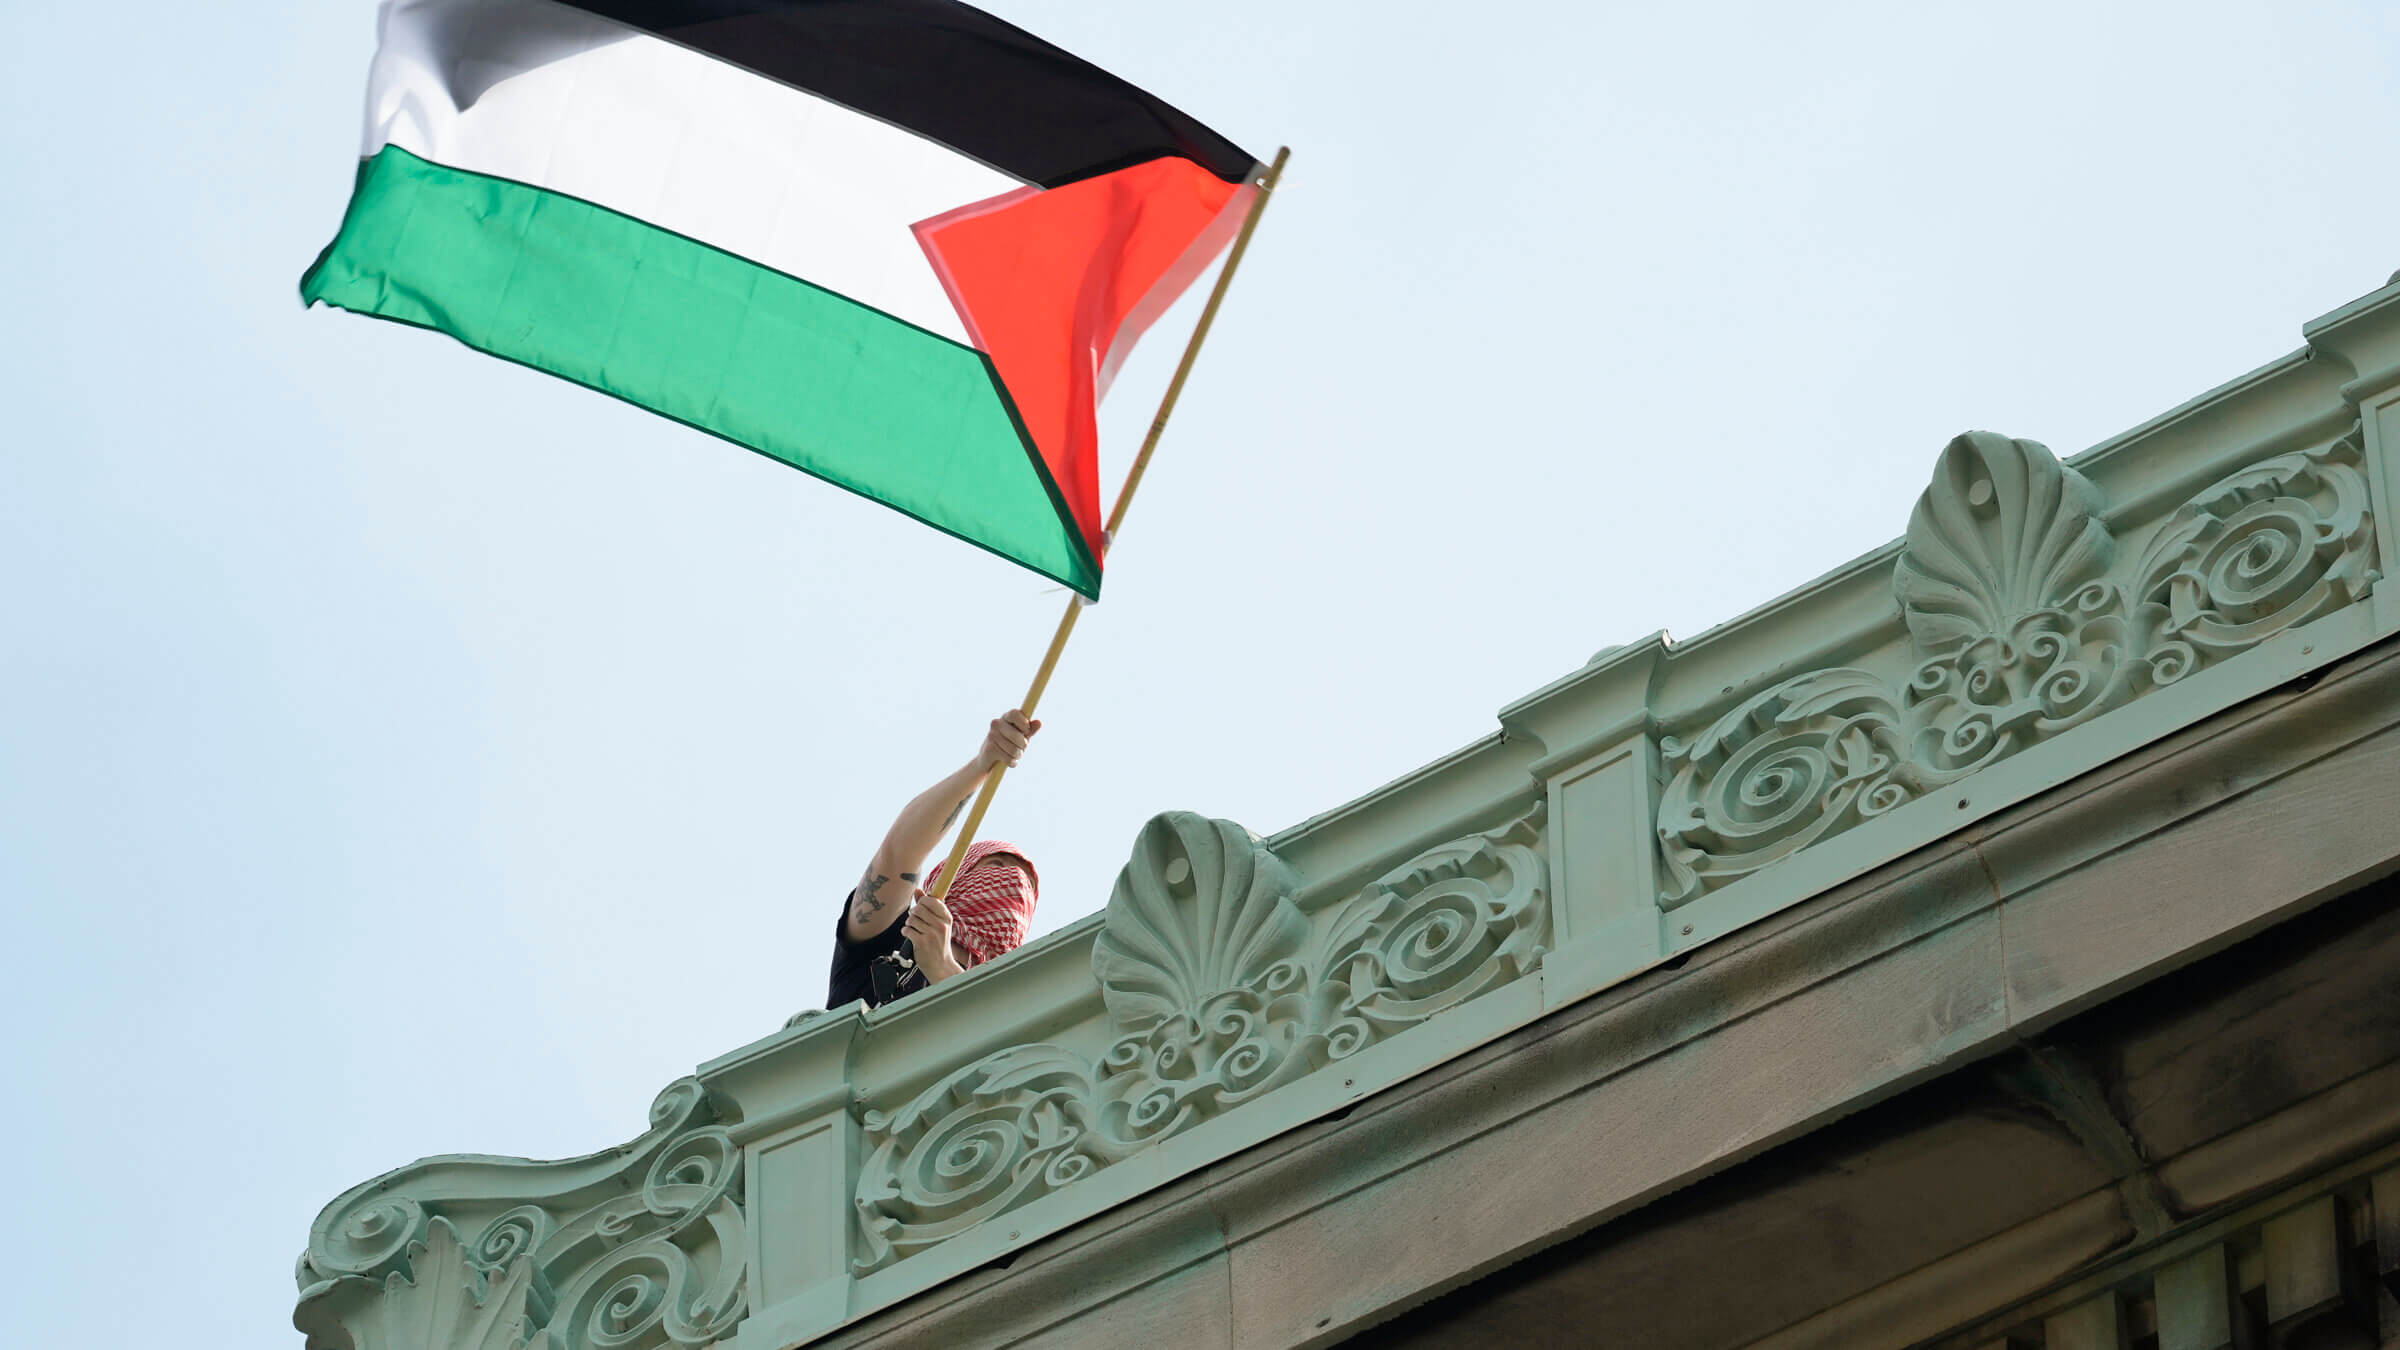 A student protester waves a Palestinian flag above Hamilton Hall  on the campus of Columbia University.